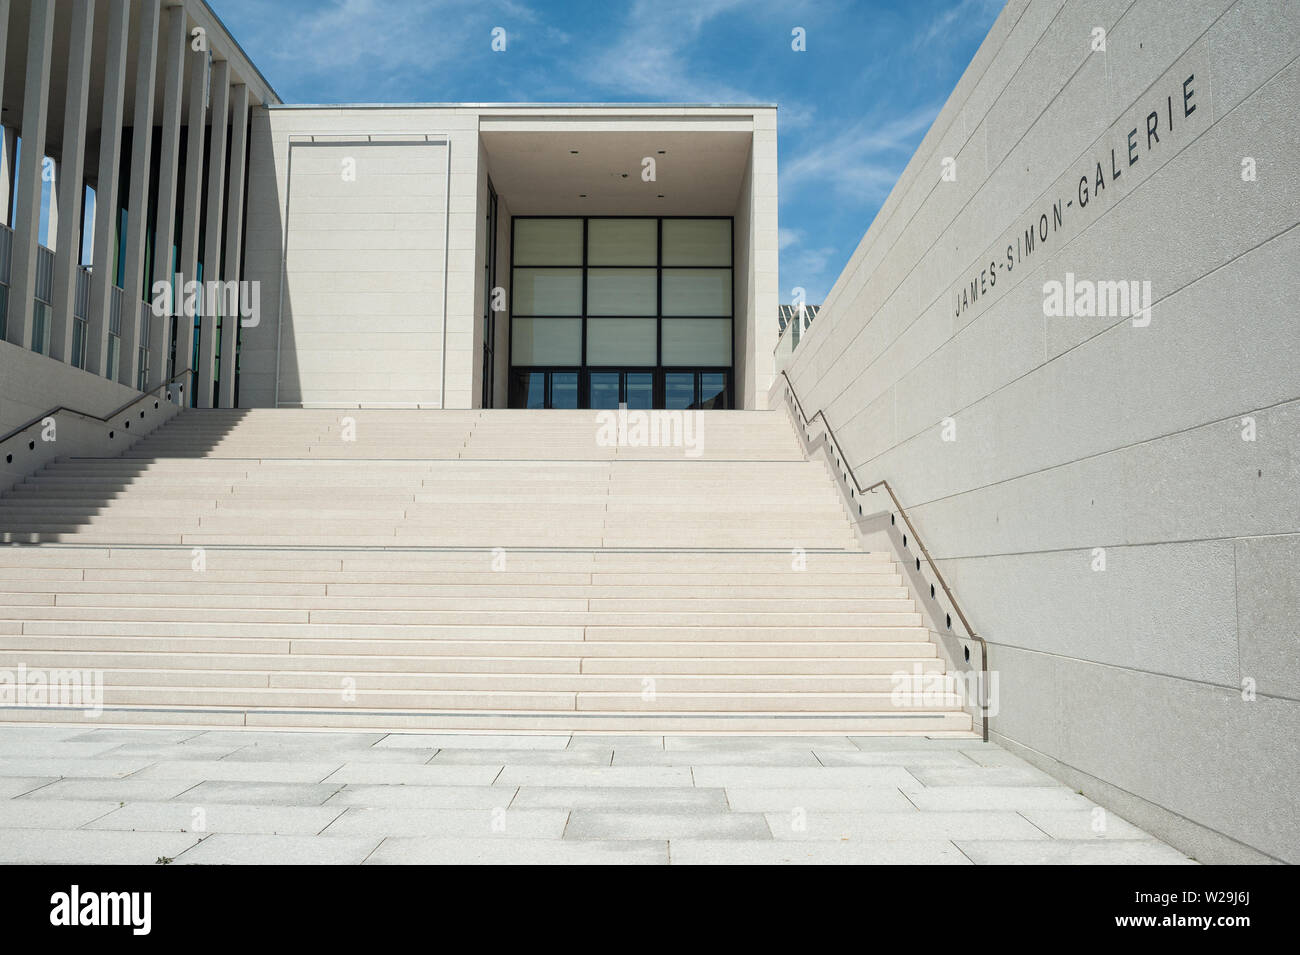 25.06.2019, Berlin, Germany, Europe - Staircase to the James Simon Gallery in Berlin's Mitte locality designed by British architect David Chipperfield. Stock Photo